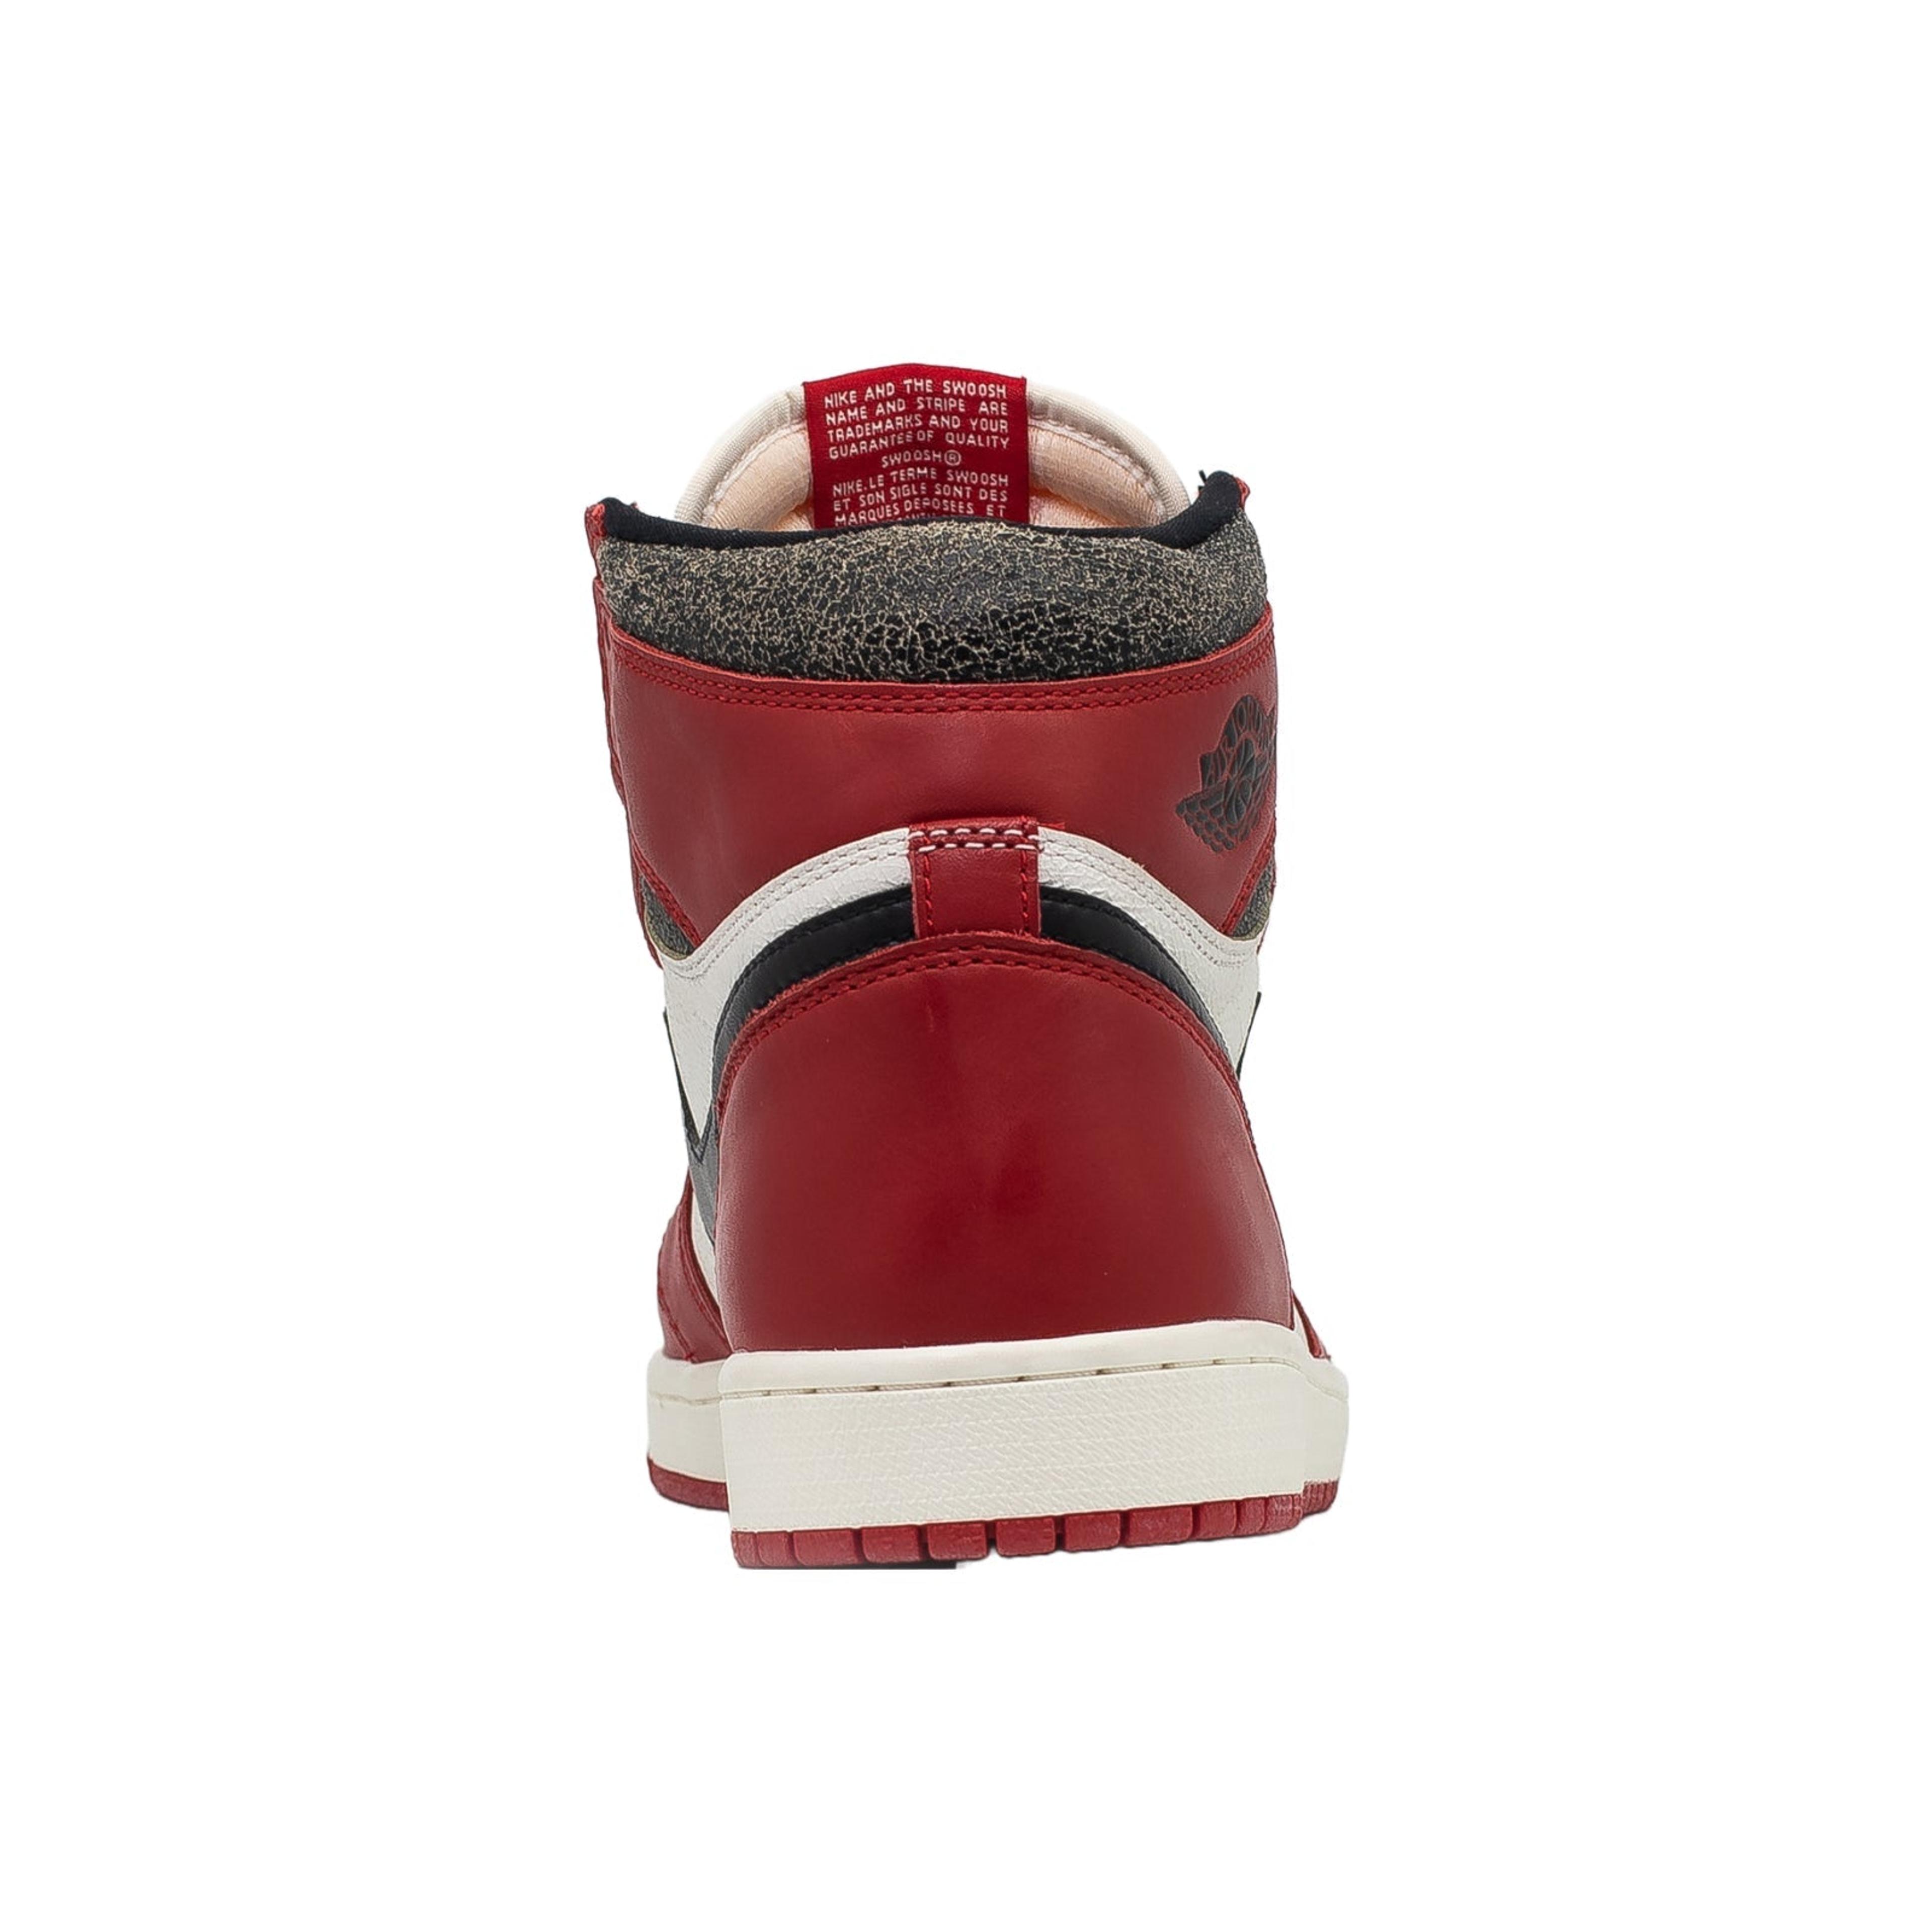 Alternate View 3 of Air Jordan 1 High, Chicago Lost and Found